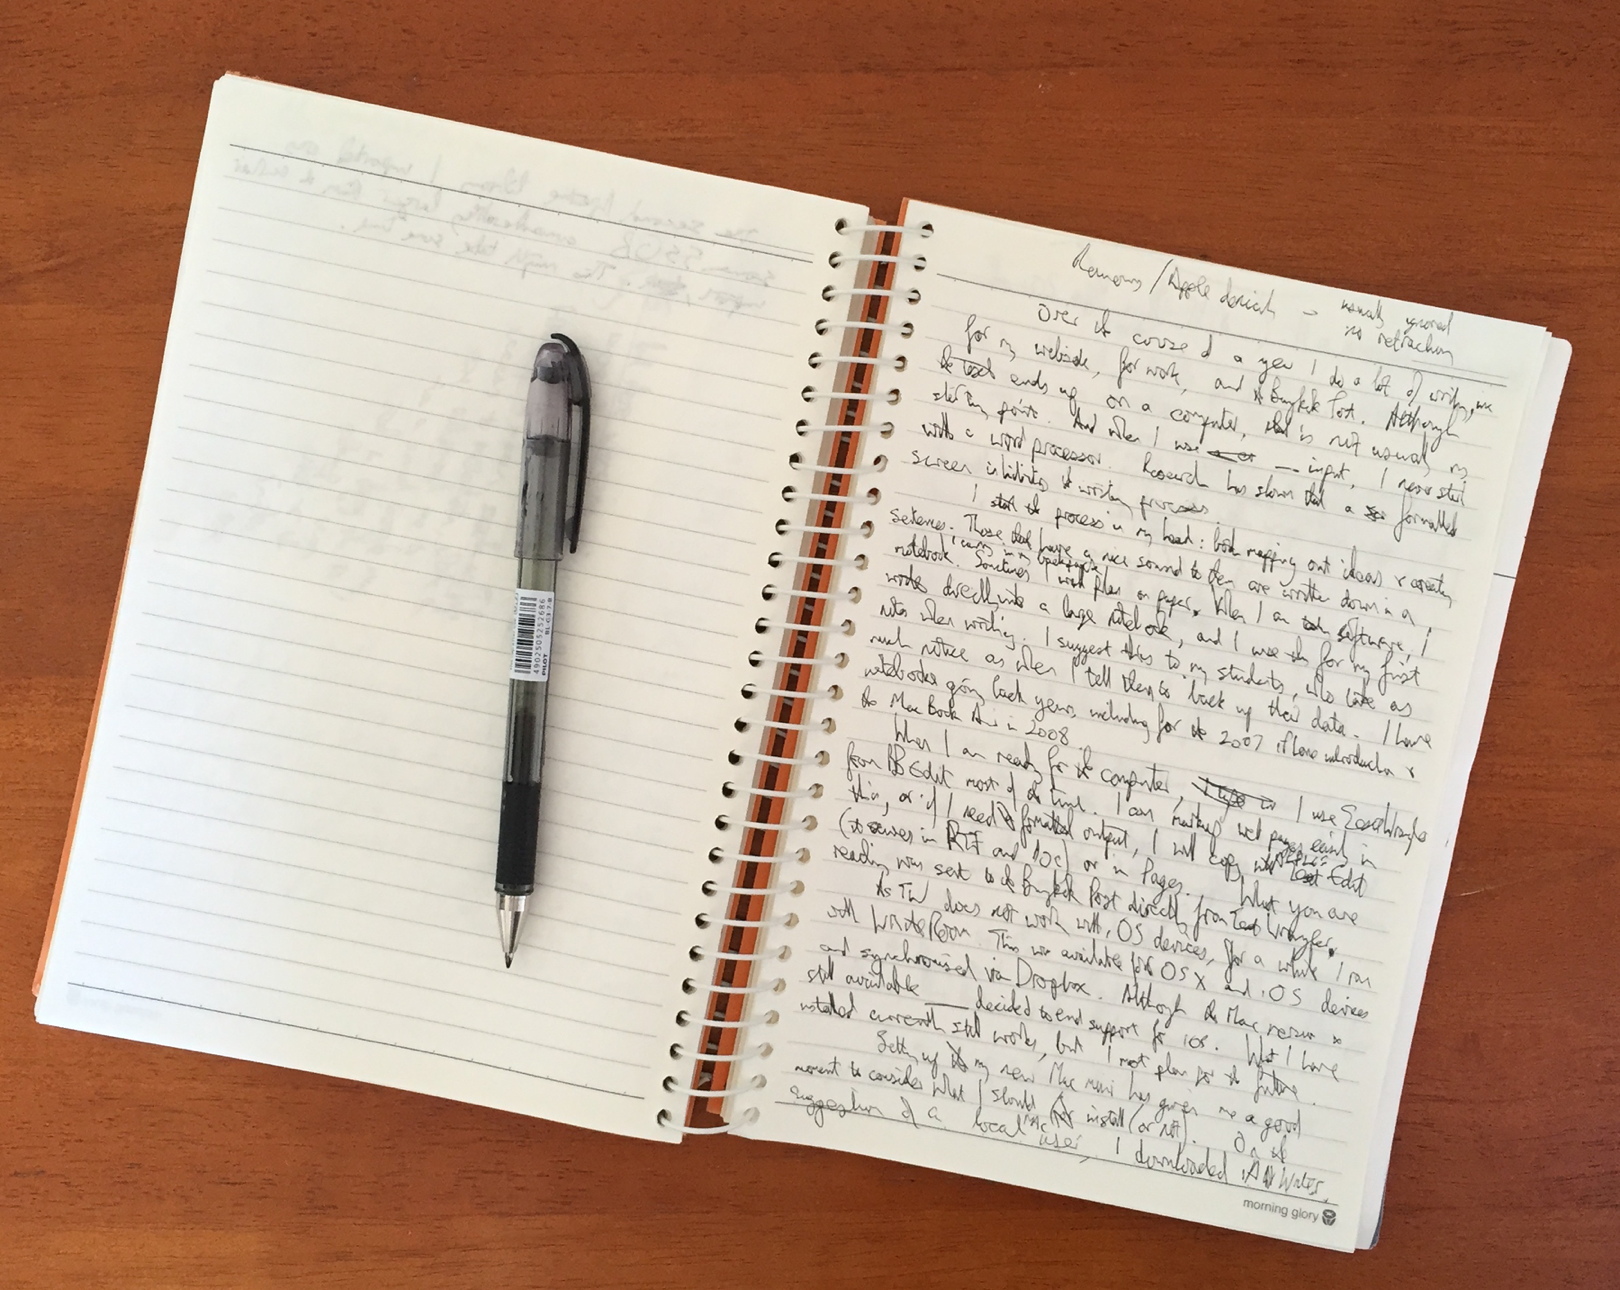 Notebooks - the start of the writing process